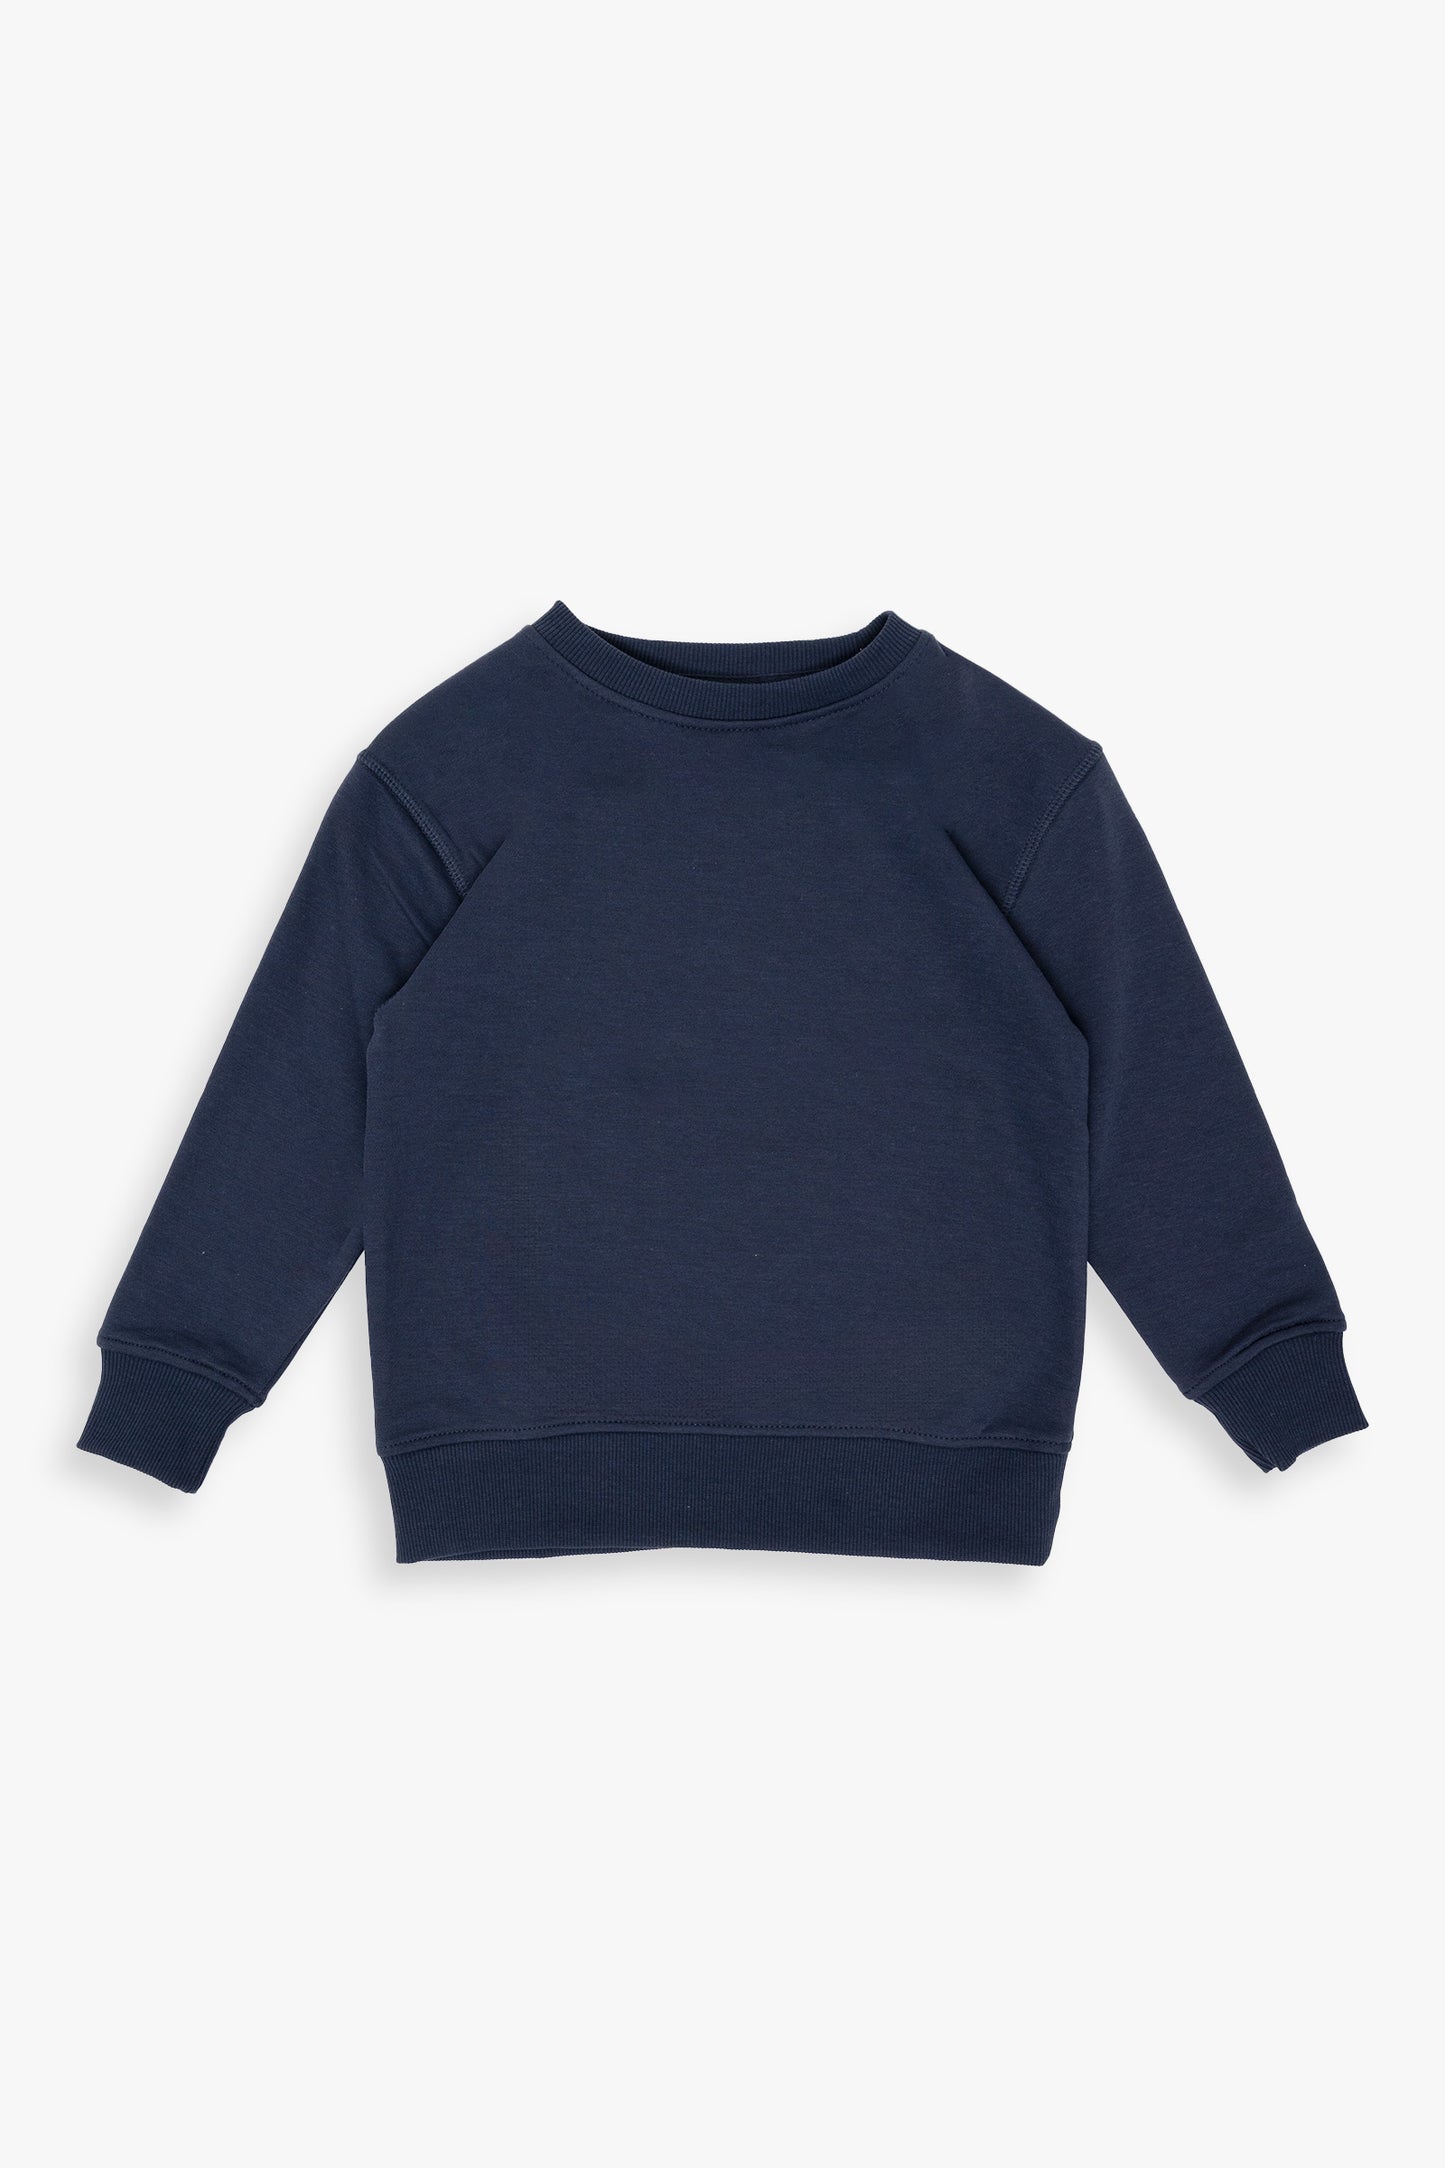 Youth Kids Unisex French Terry Cotton Crewneck